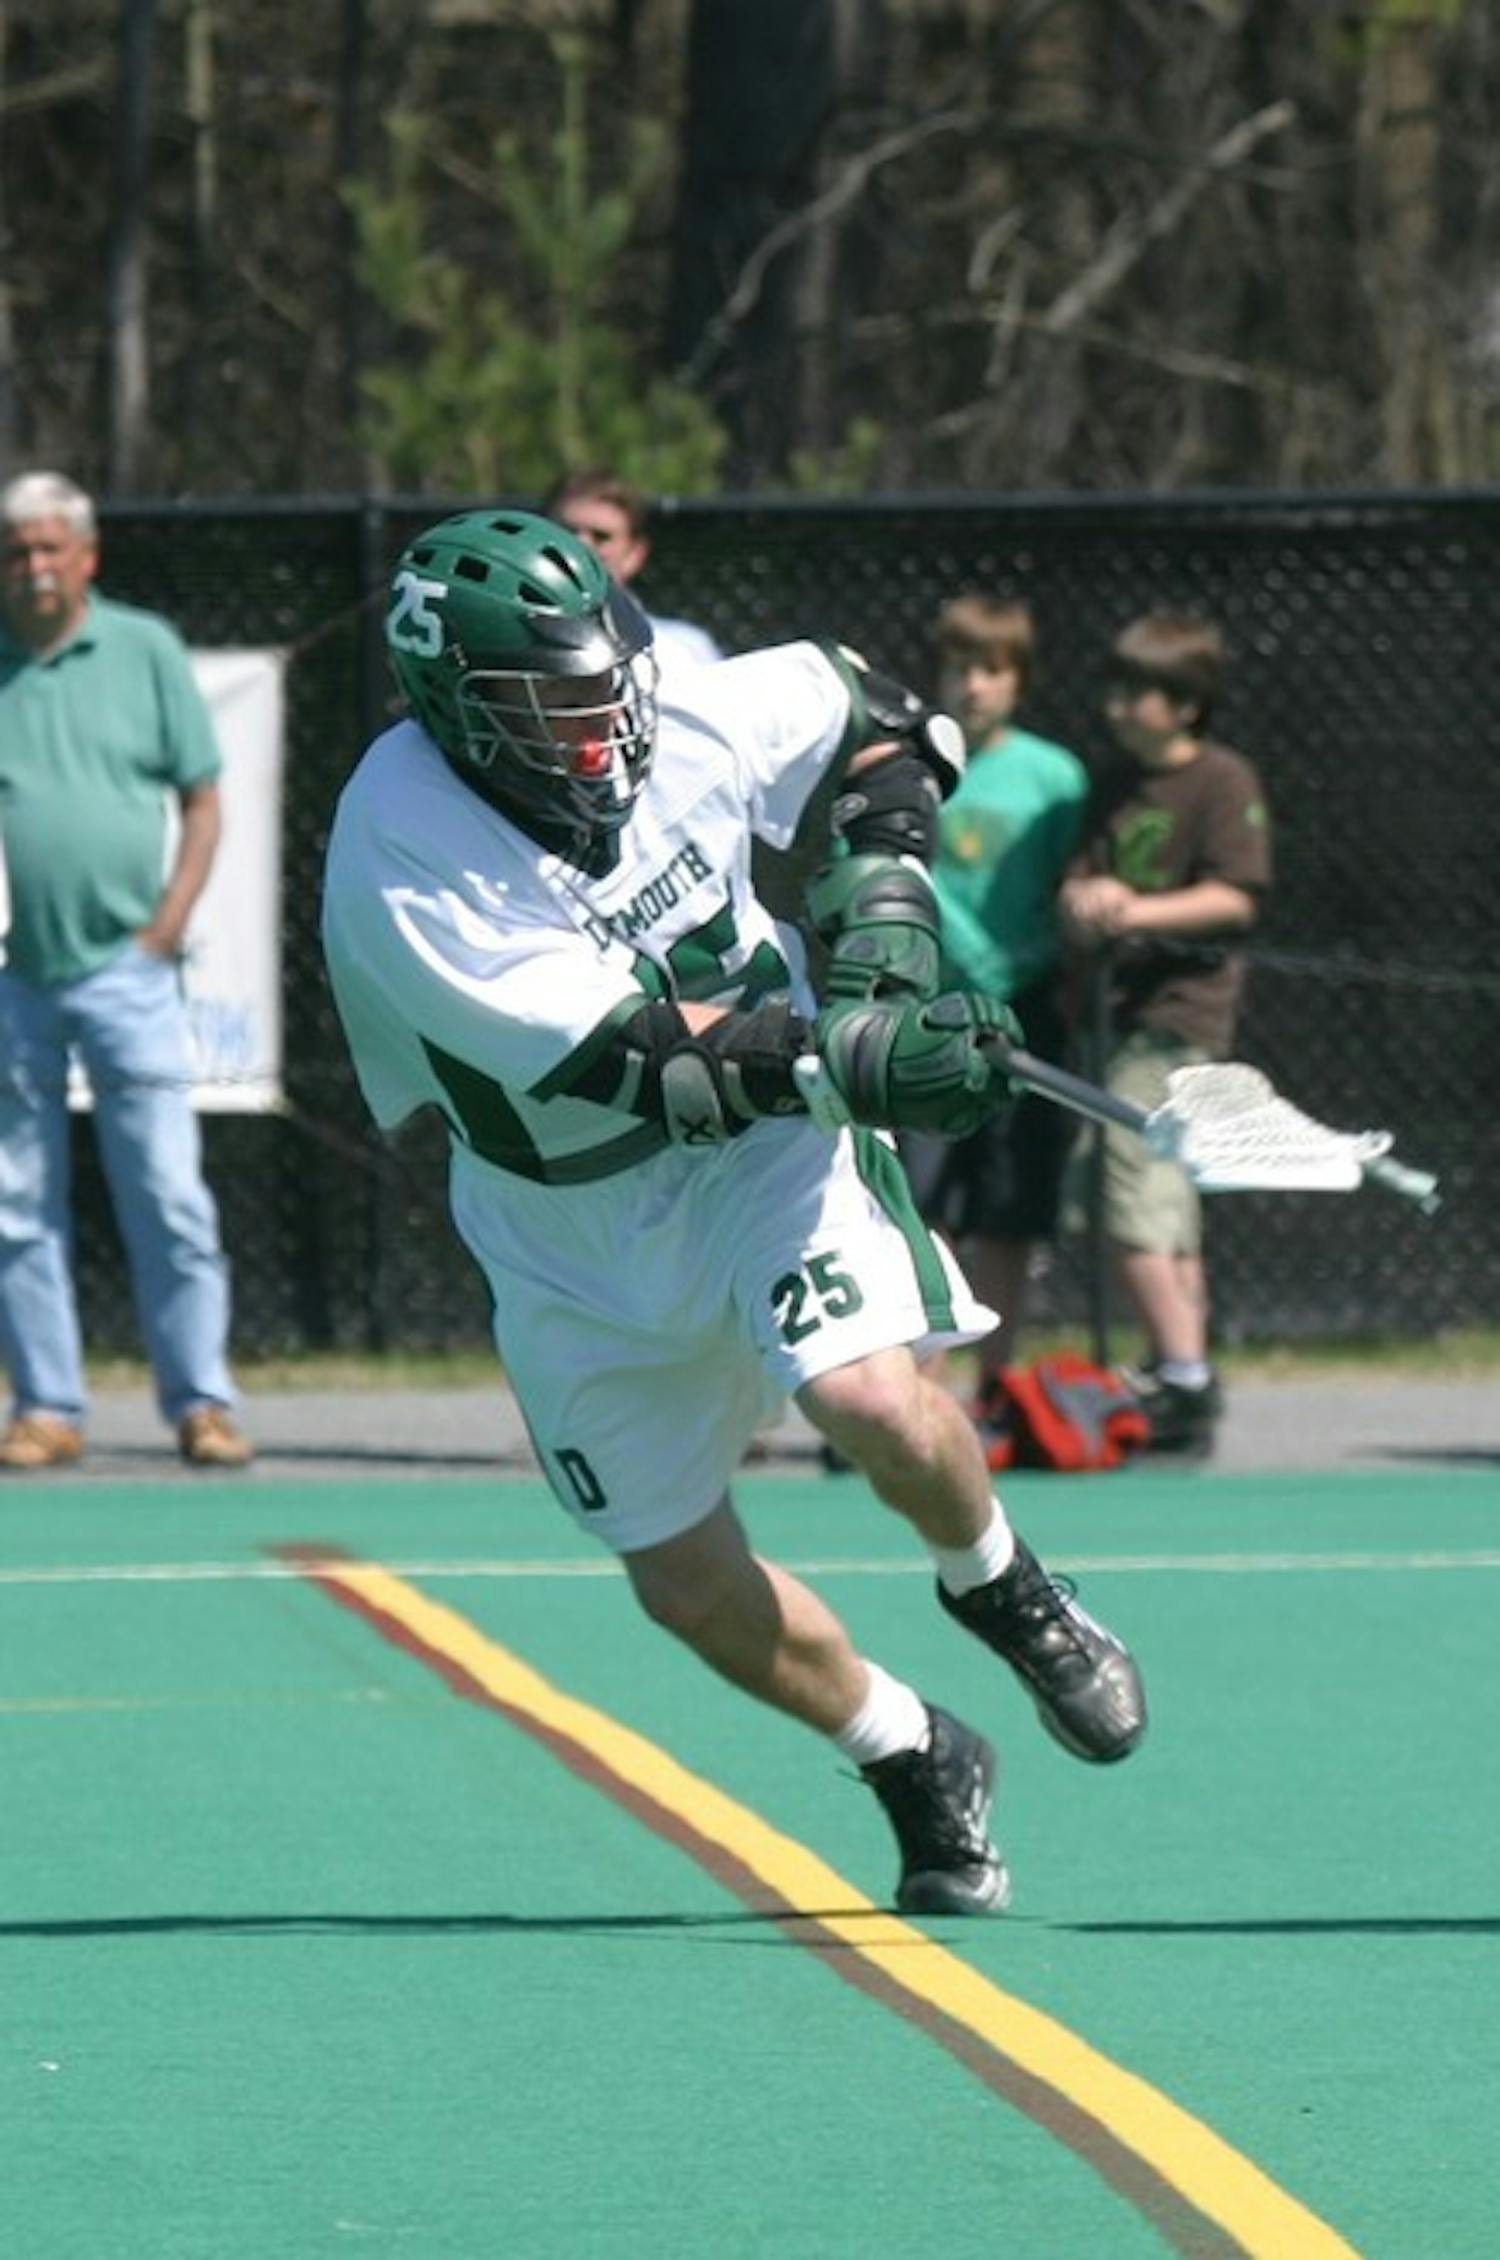 Dartmouth men's lacrosse defeated Holy Cross 16-10 on Tuesday.